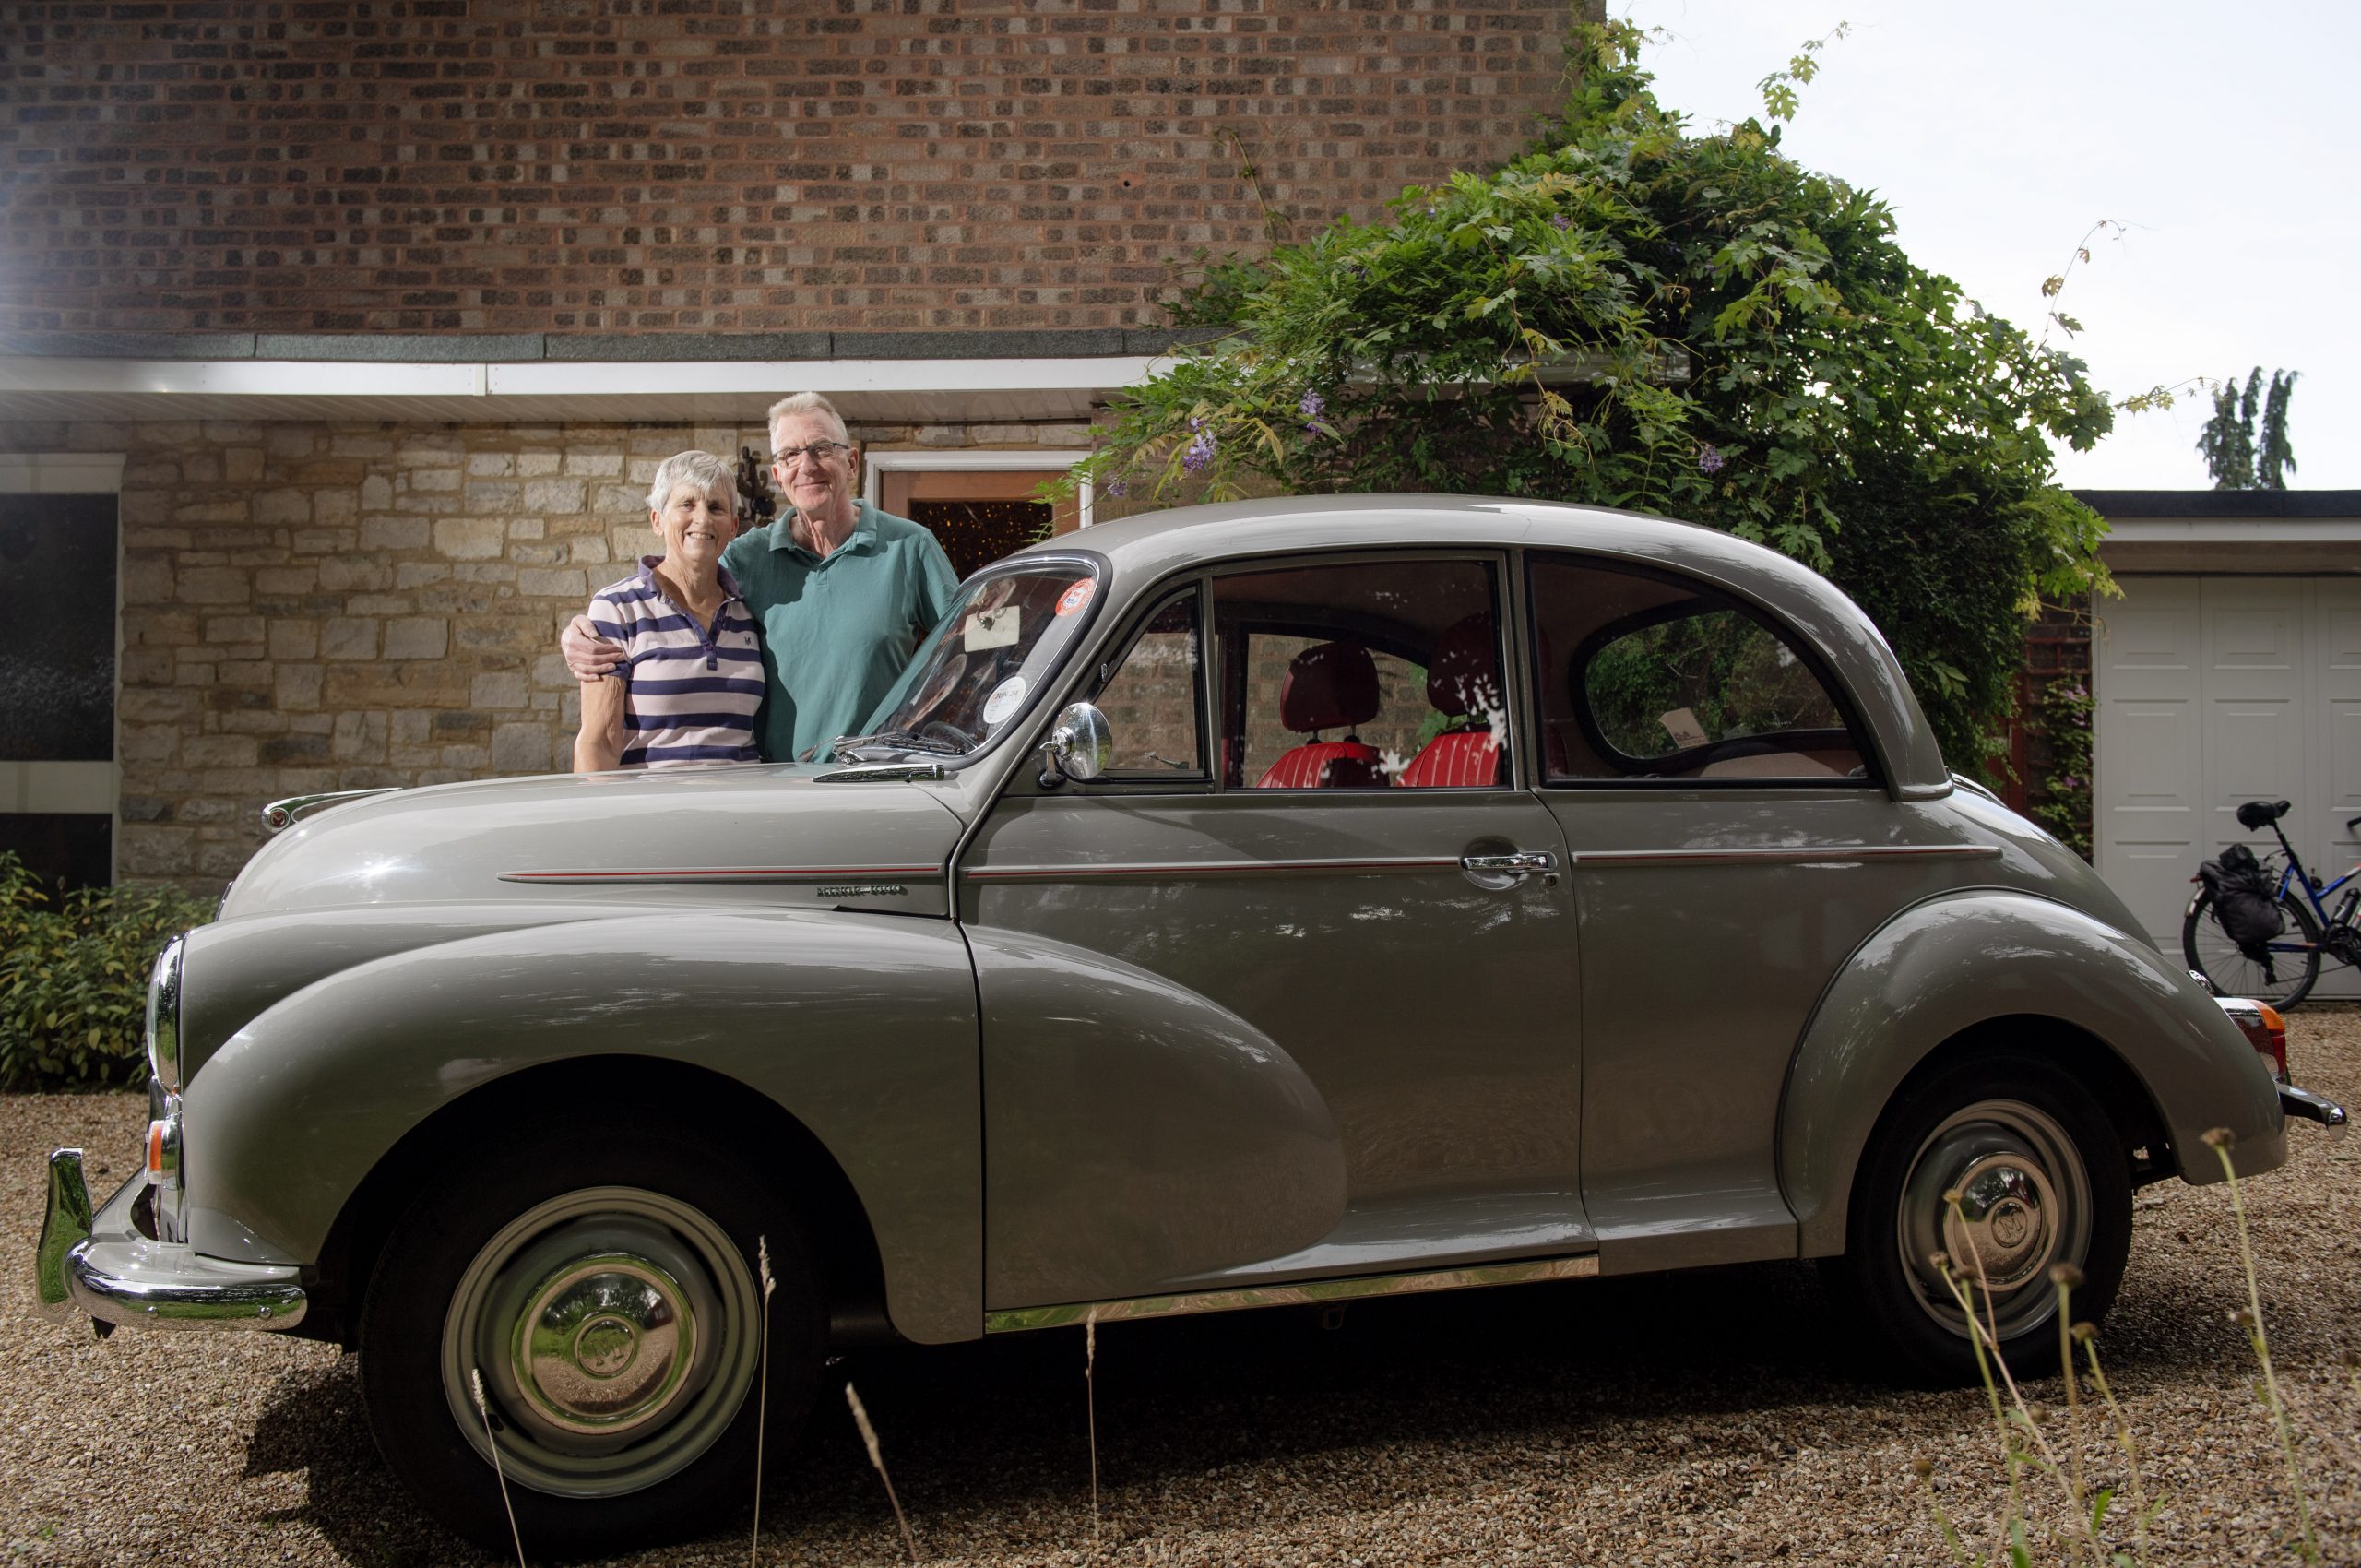 I’ve driven same Morris Minor for 50 years and 200,000 miles since passing test – and I’ve found perfect new home for it